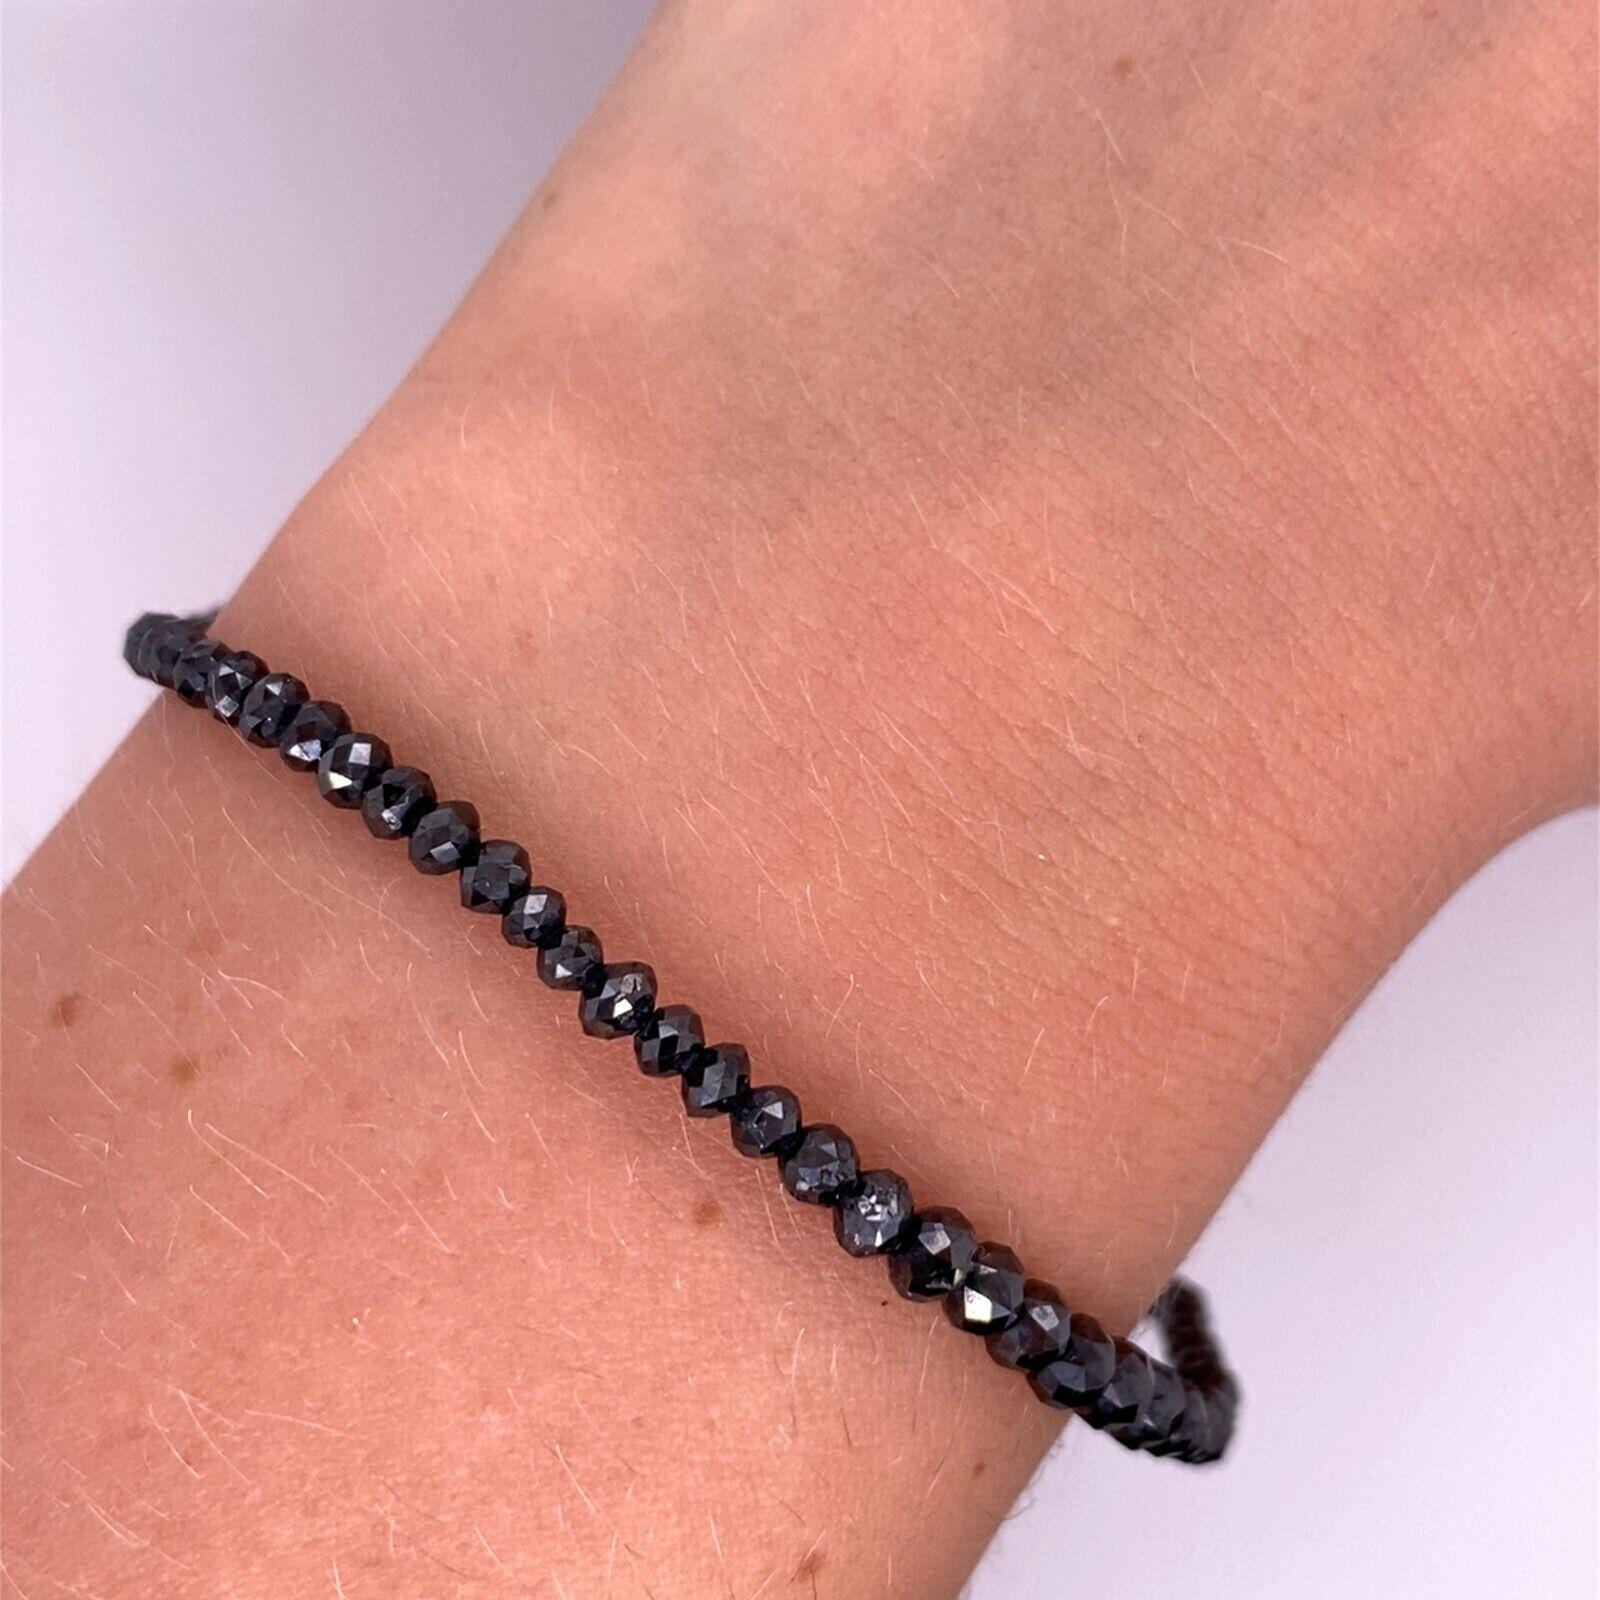 Graduated Natural Black Diamond Bracelet

This Black Diamond bracelet is an elegant piece that is perfect for everyday wear. It is set in Sterling Silver and features 5.0ct graduated natural Black Diamonds. It is secured by a lobster clasp and is